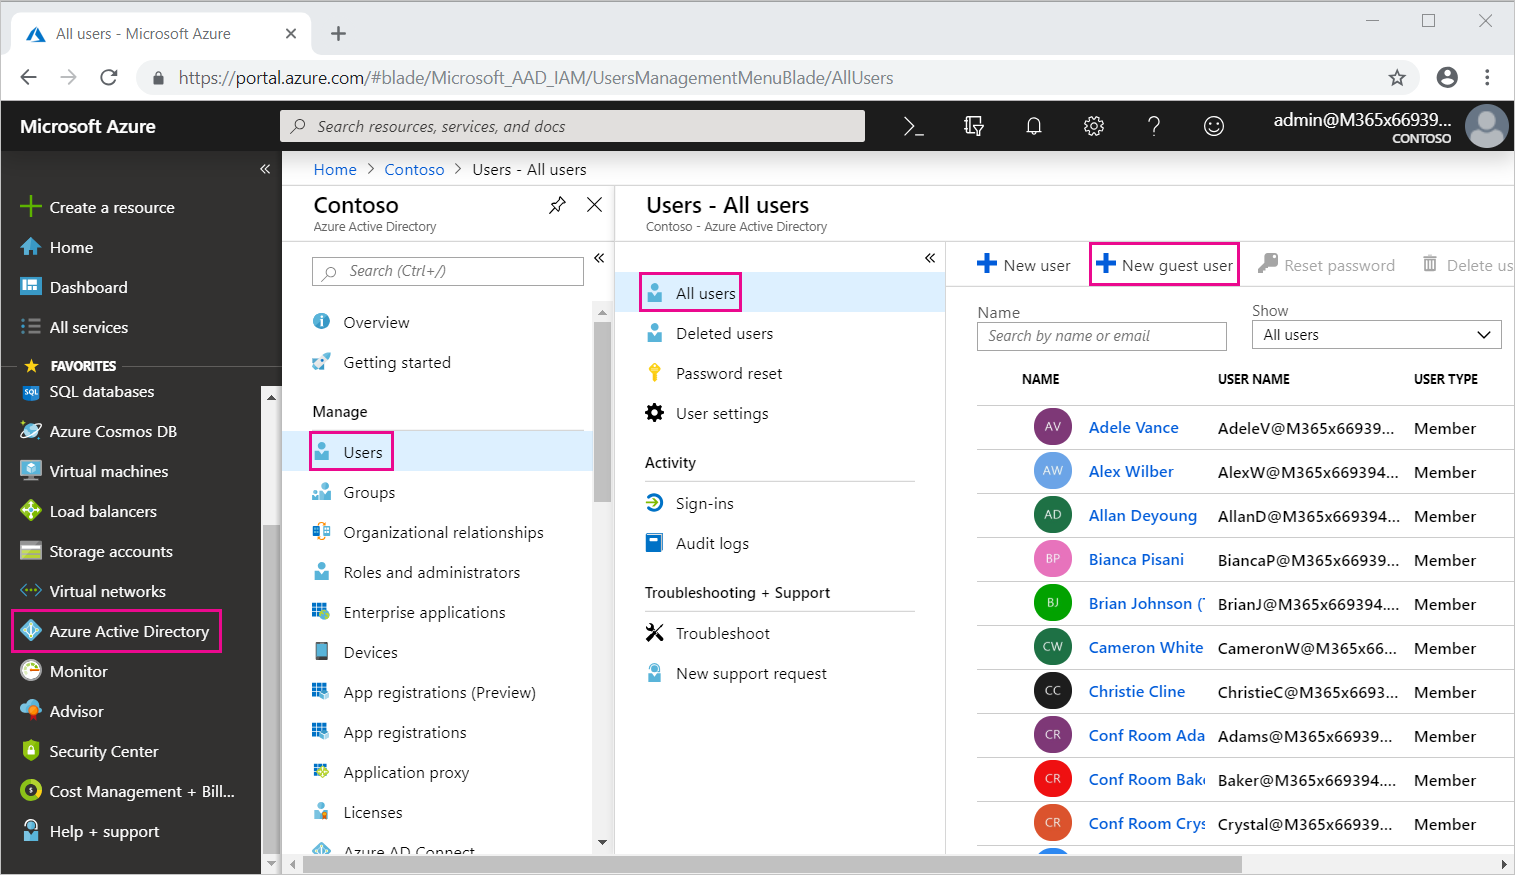 Screenshot of the Azure portal with the New guest user option called out.